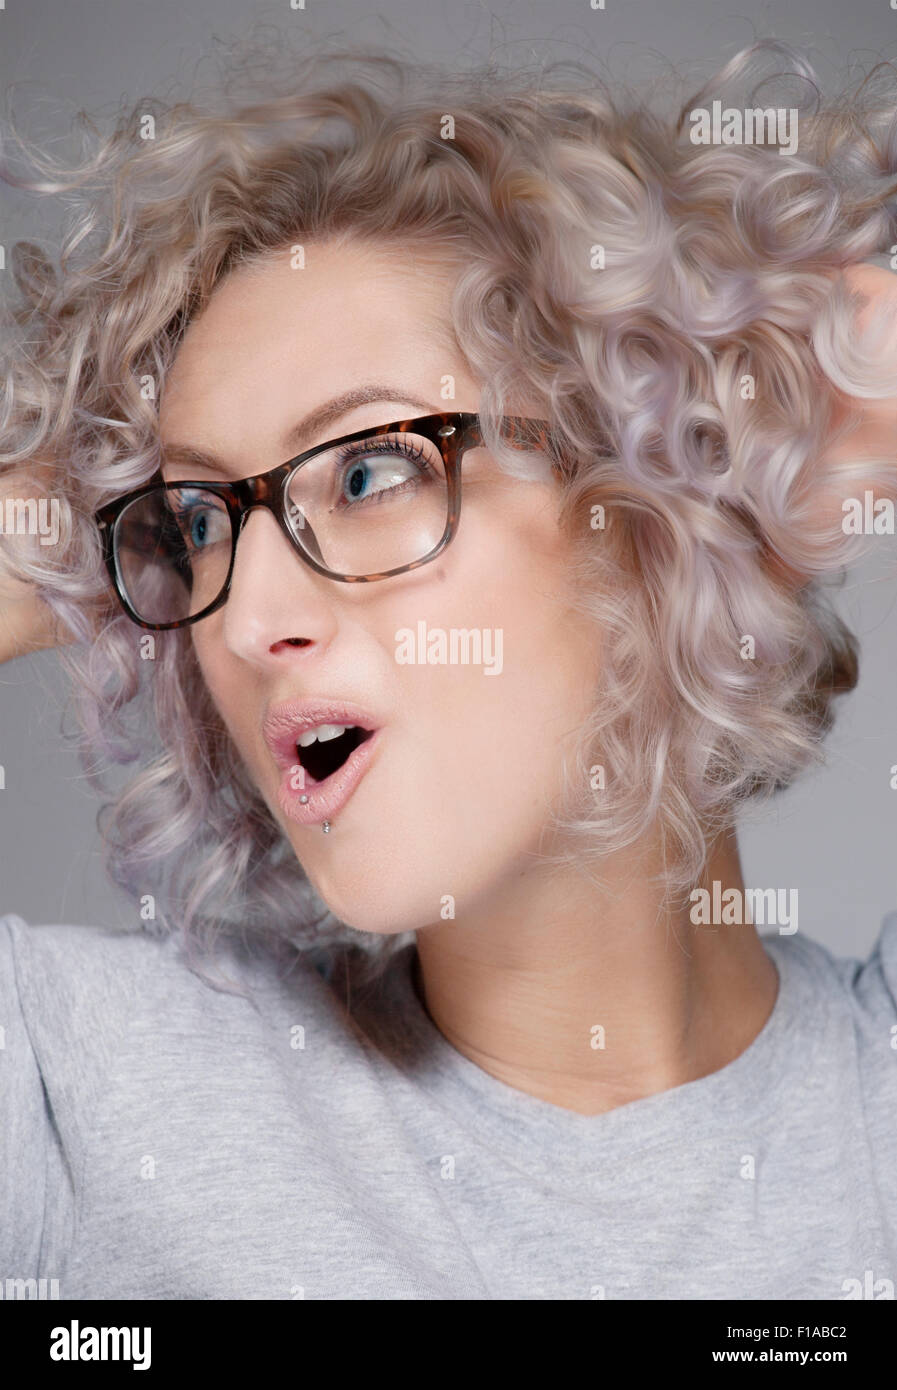 A white European female age 20-25 wearing glasses. The shot is a portrait shot in a studio. Stock Photo